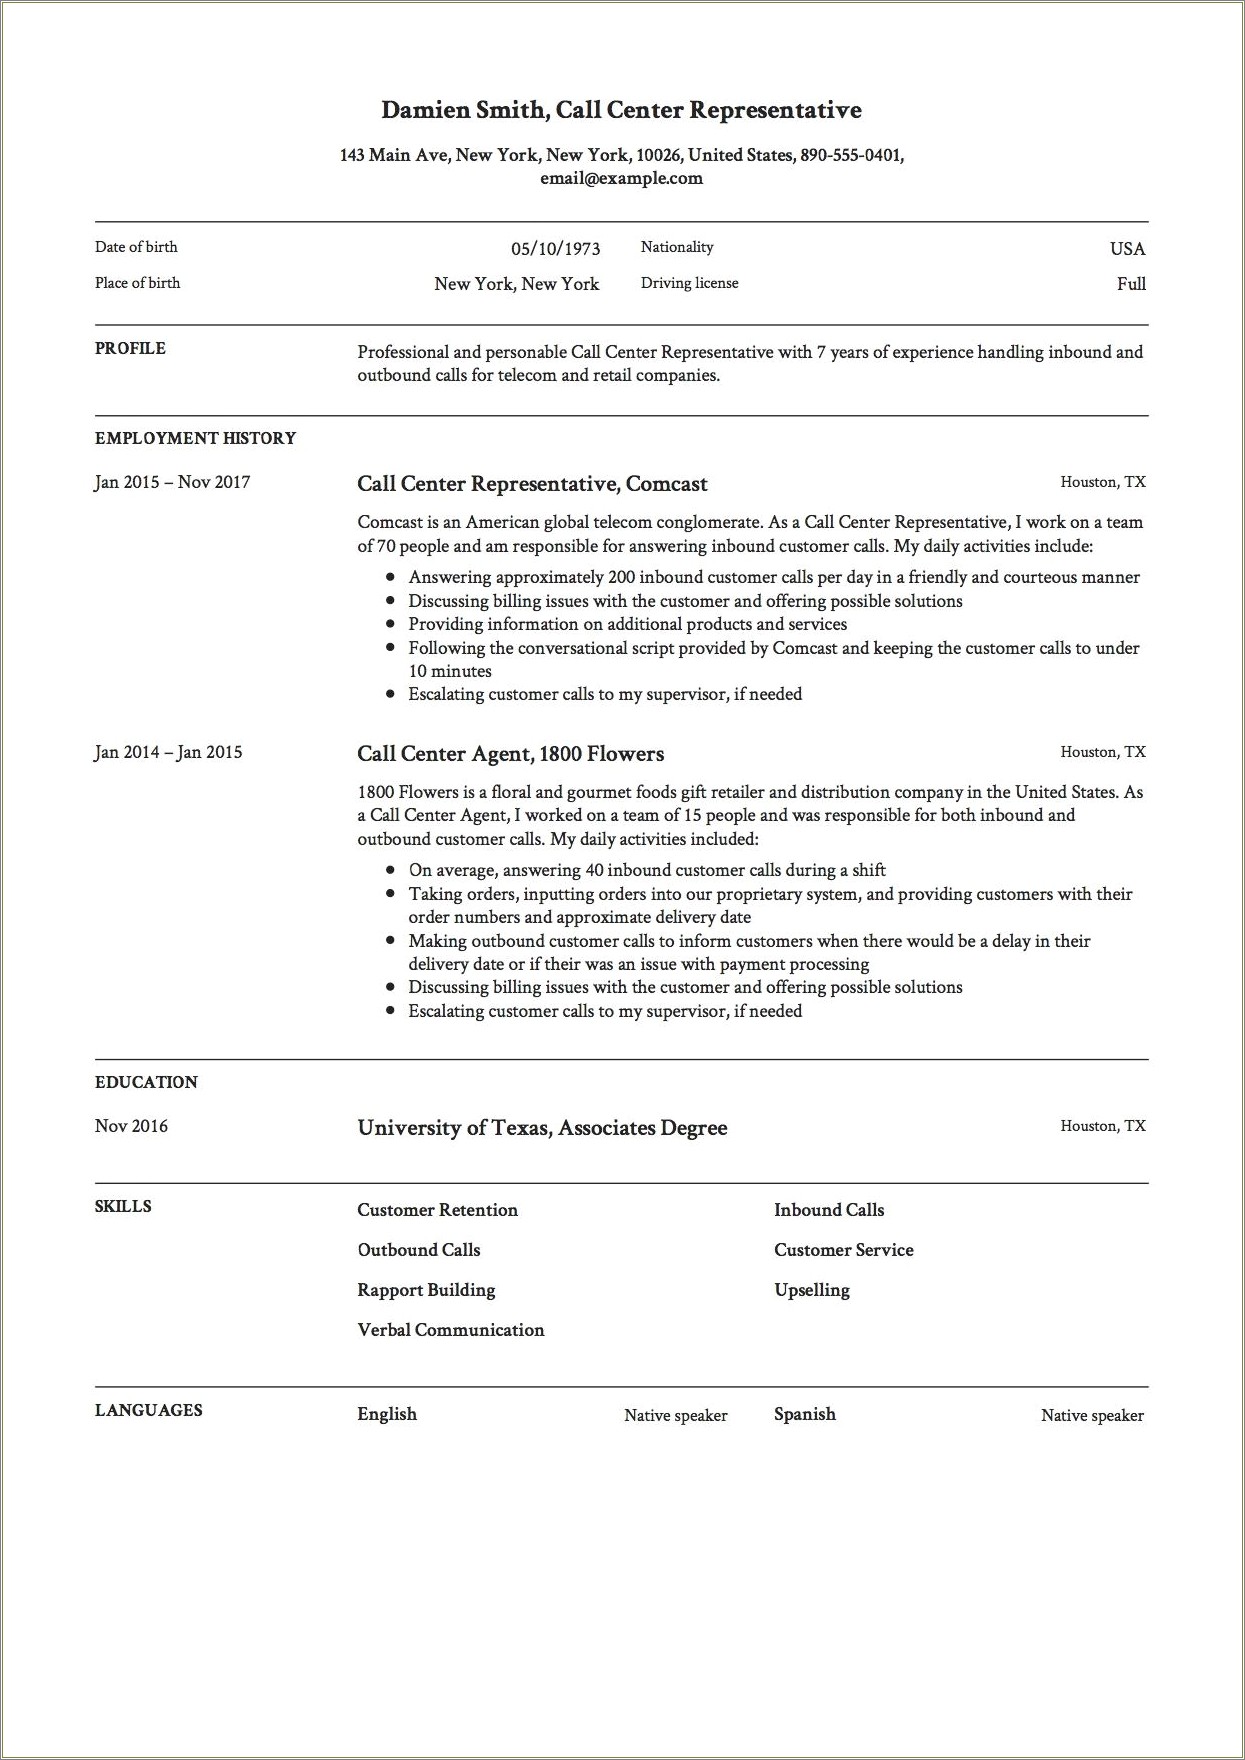 Resume Objective For Call Center Agent With Experience